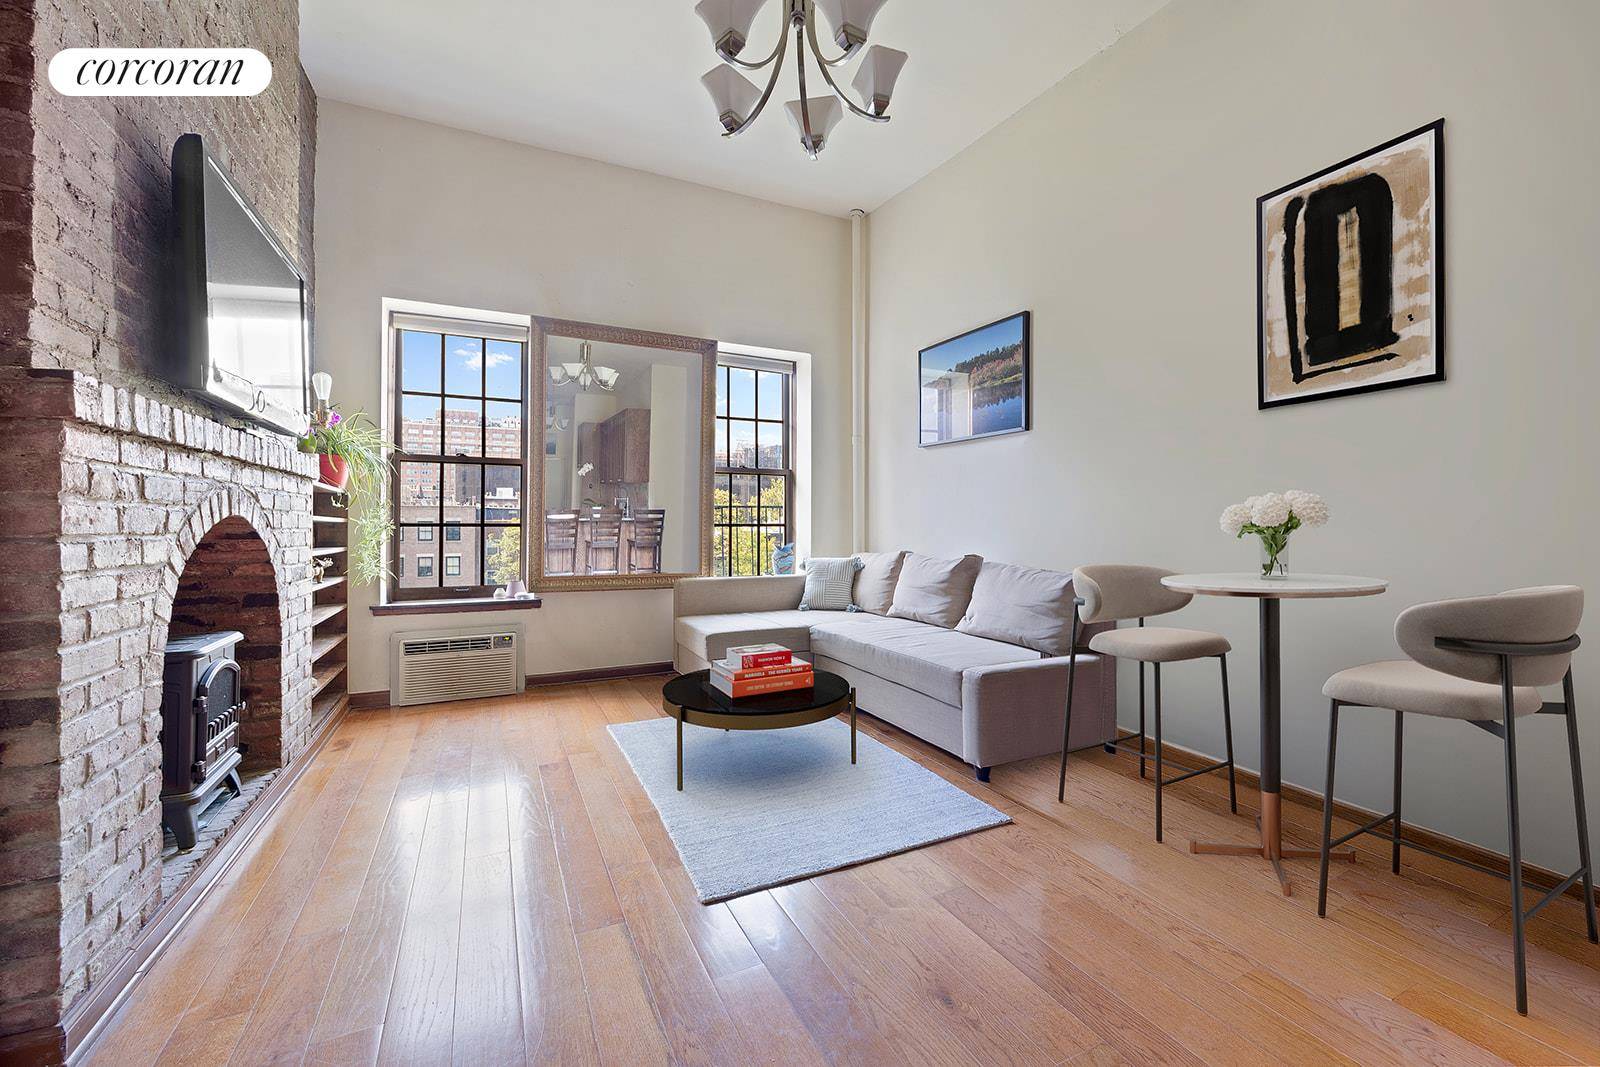 Prime Chelsea location ! In a charming pre war building, this renovated home offers gorgeous south facing unobstructed views of a park across the street.